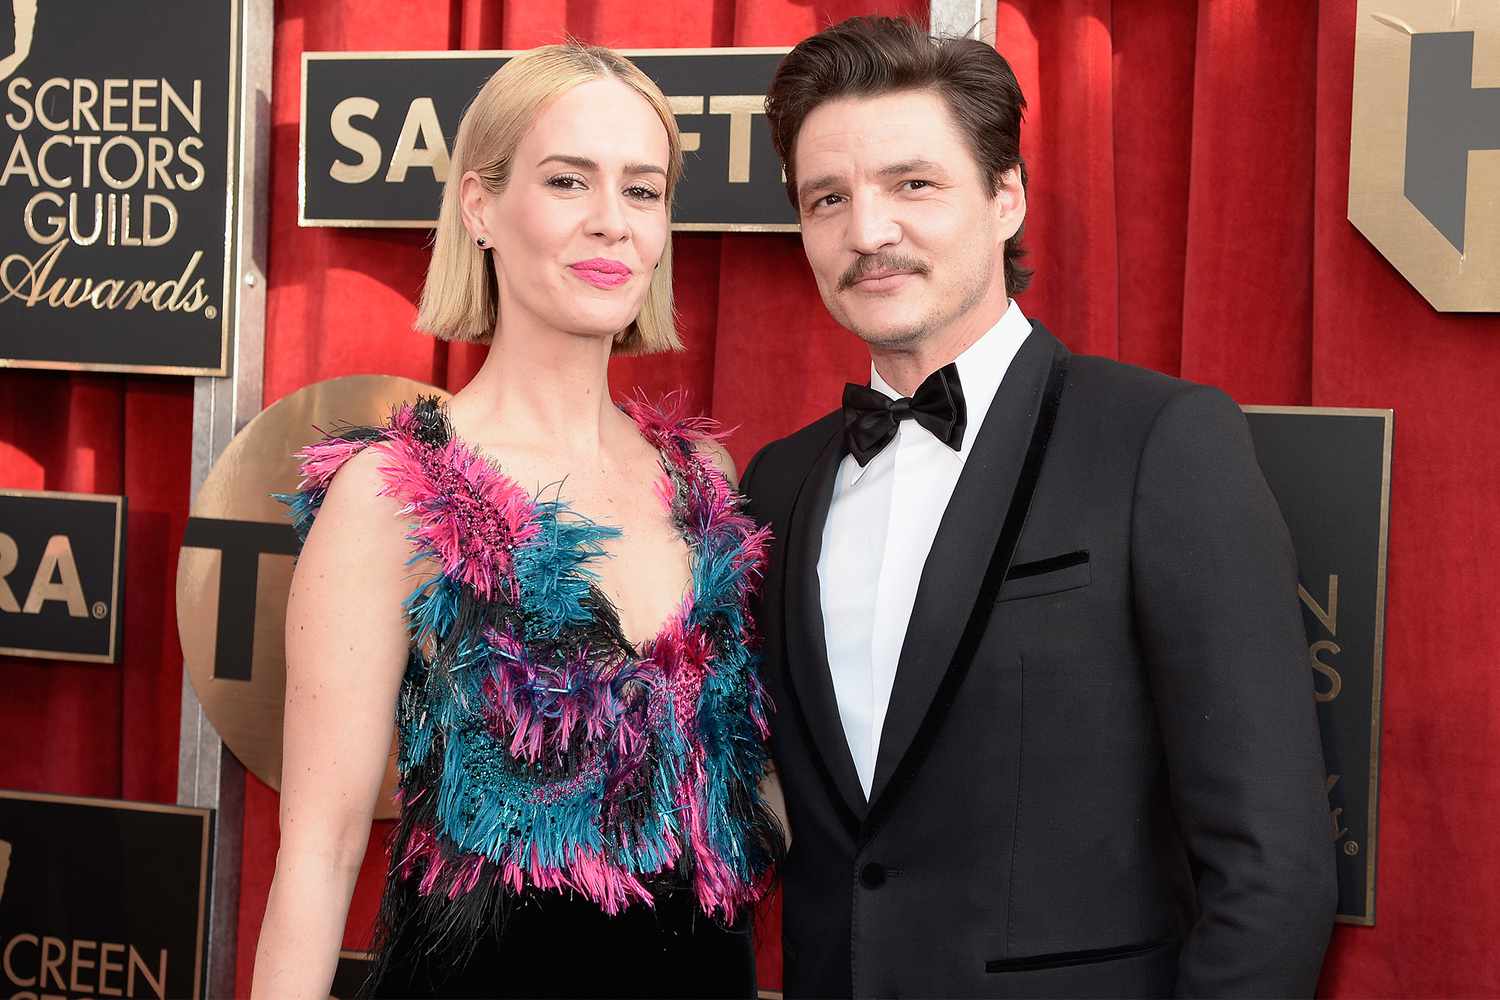 Sarah Paulson and Pedro Pascal attend the 22nd Annual Screen Actors Guild Awards at The Shrine Auditorium on January 30, 2016 in Los Angeles, California.